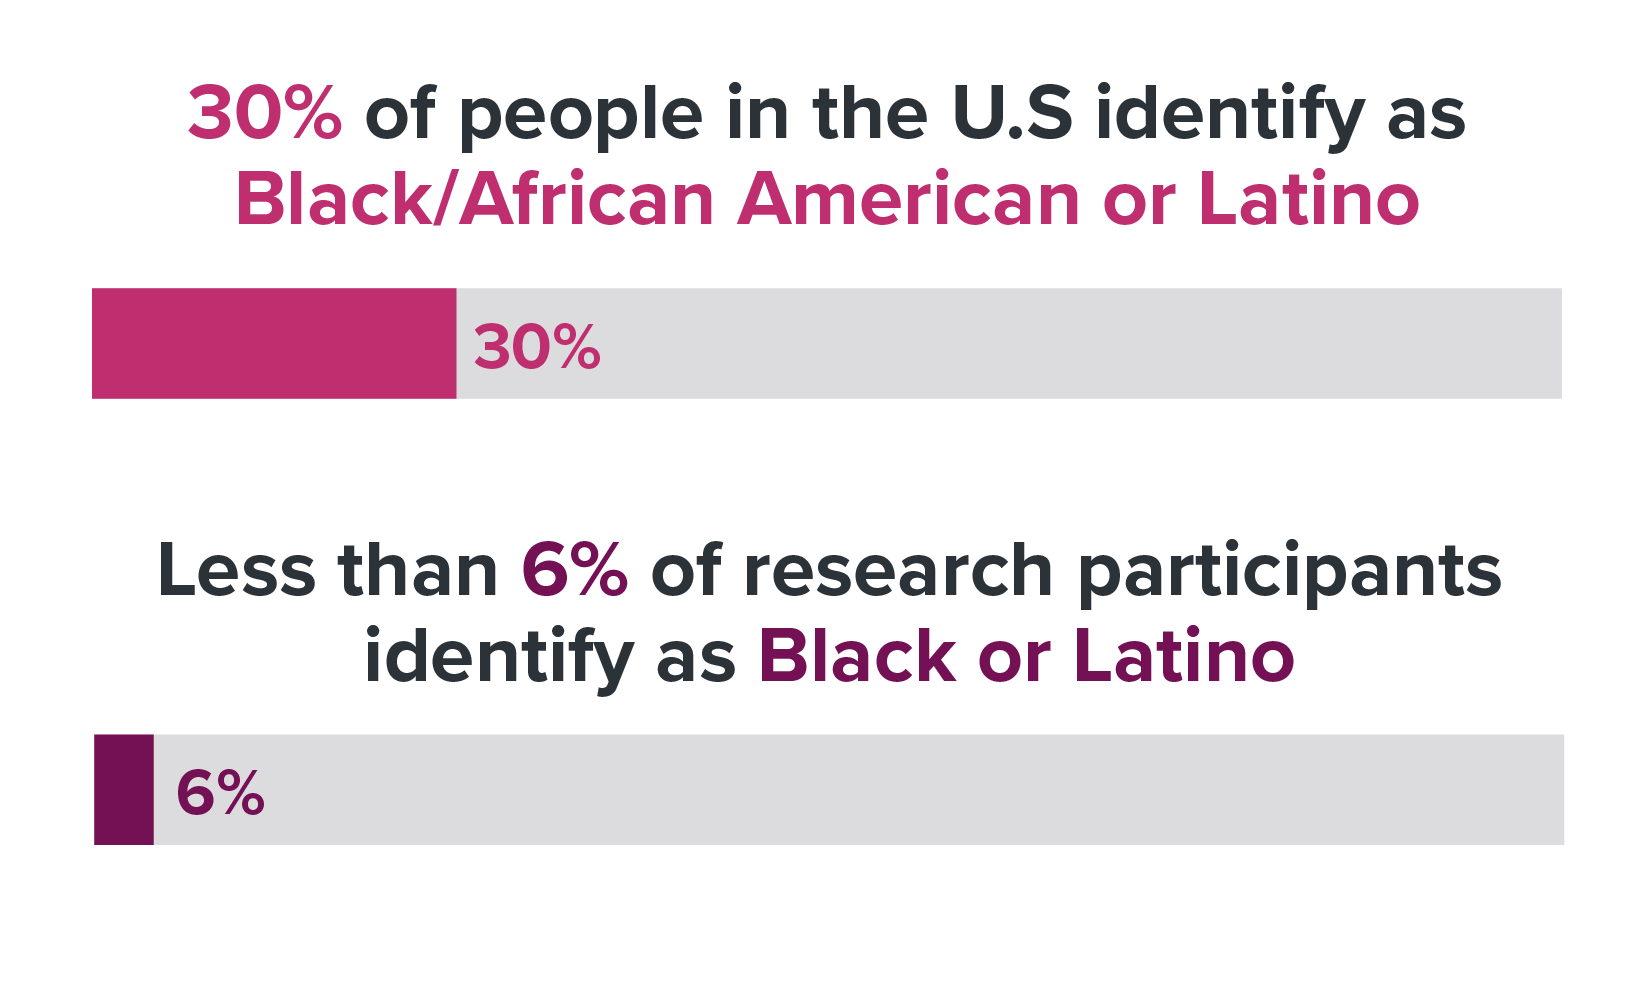 Currently, 30% of people in the U.S identify as Black/African American or Latino, but less than 6% of research participants identify as Black or Latino. A lack of representation from racial and ethnic minority groups in clinical trials results in interventions that may not be effective among different populations.